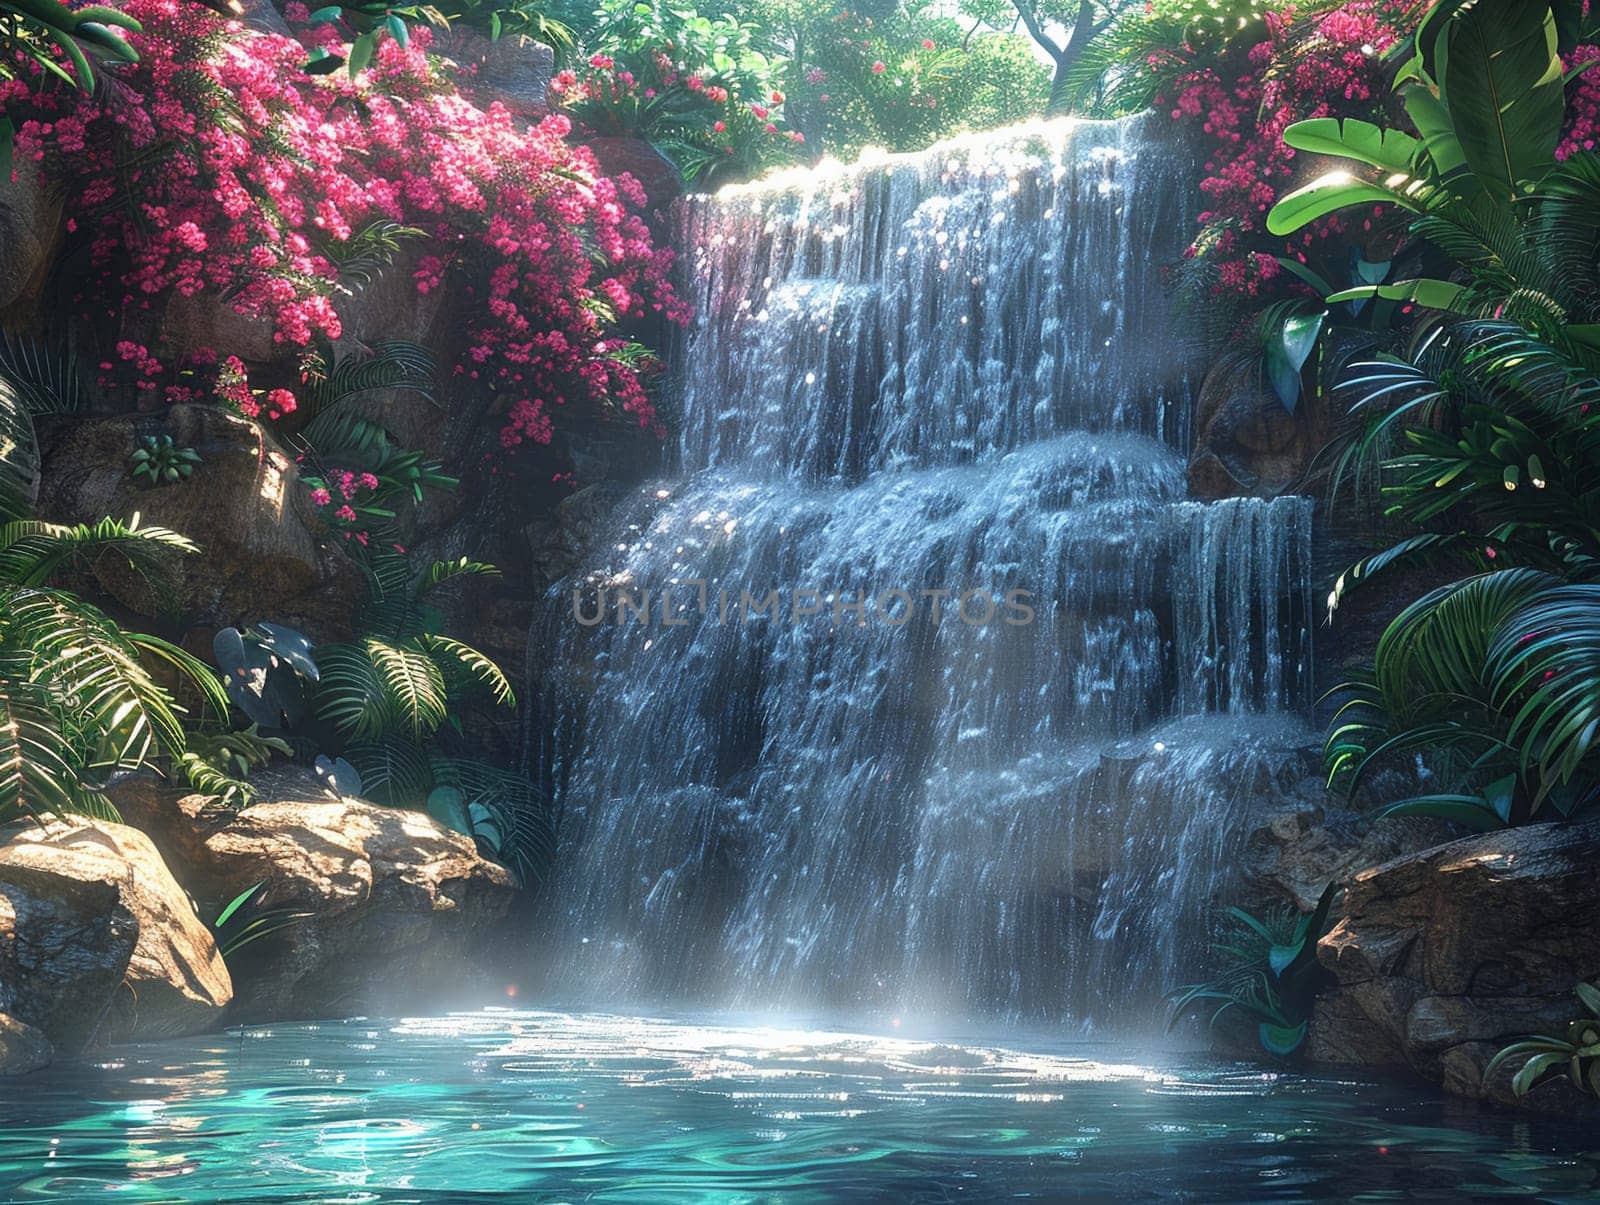 Waterfall oasis digitally created in Photoshop by Benzoix